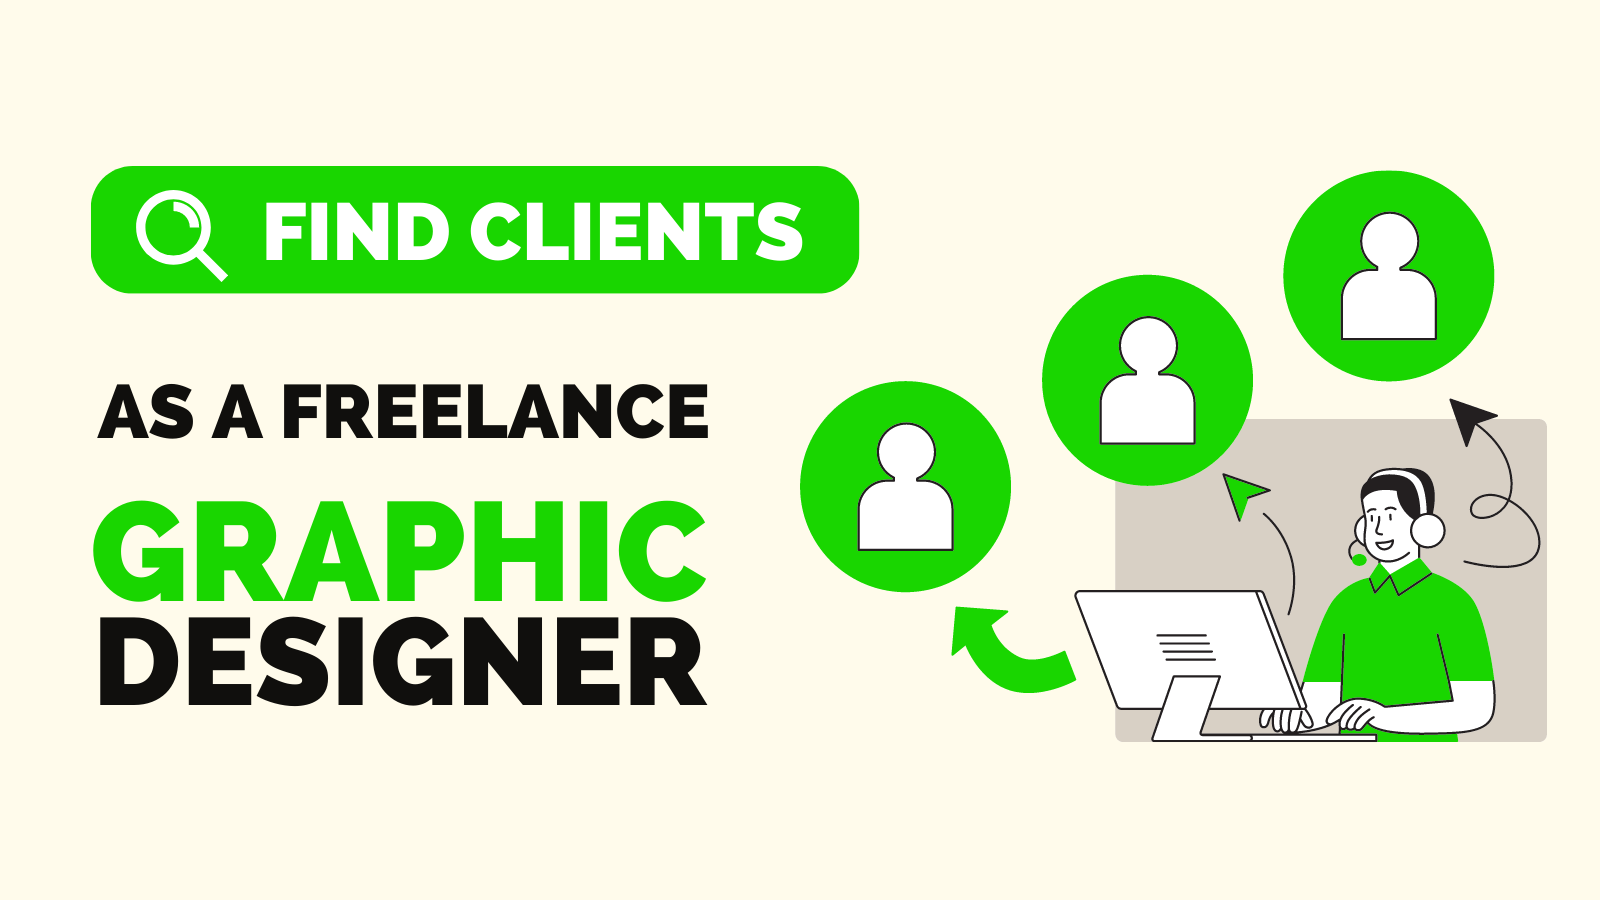 Find Clients as a Freelance Graphic Designer